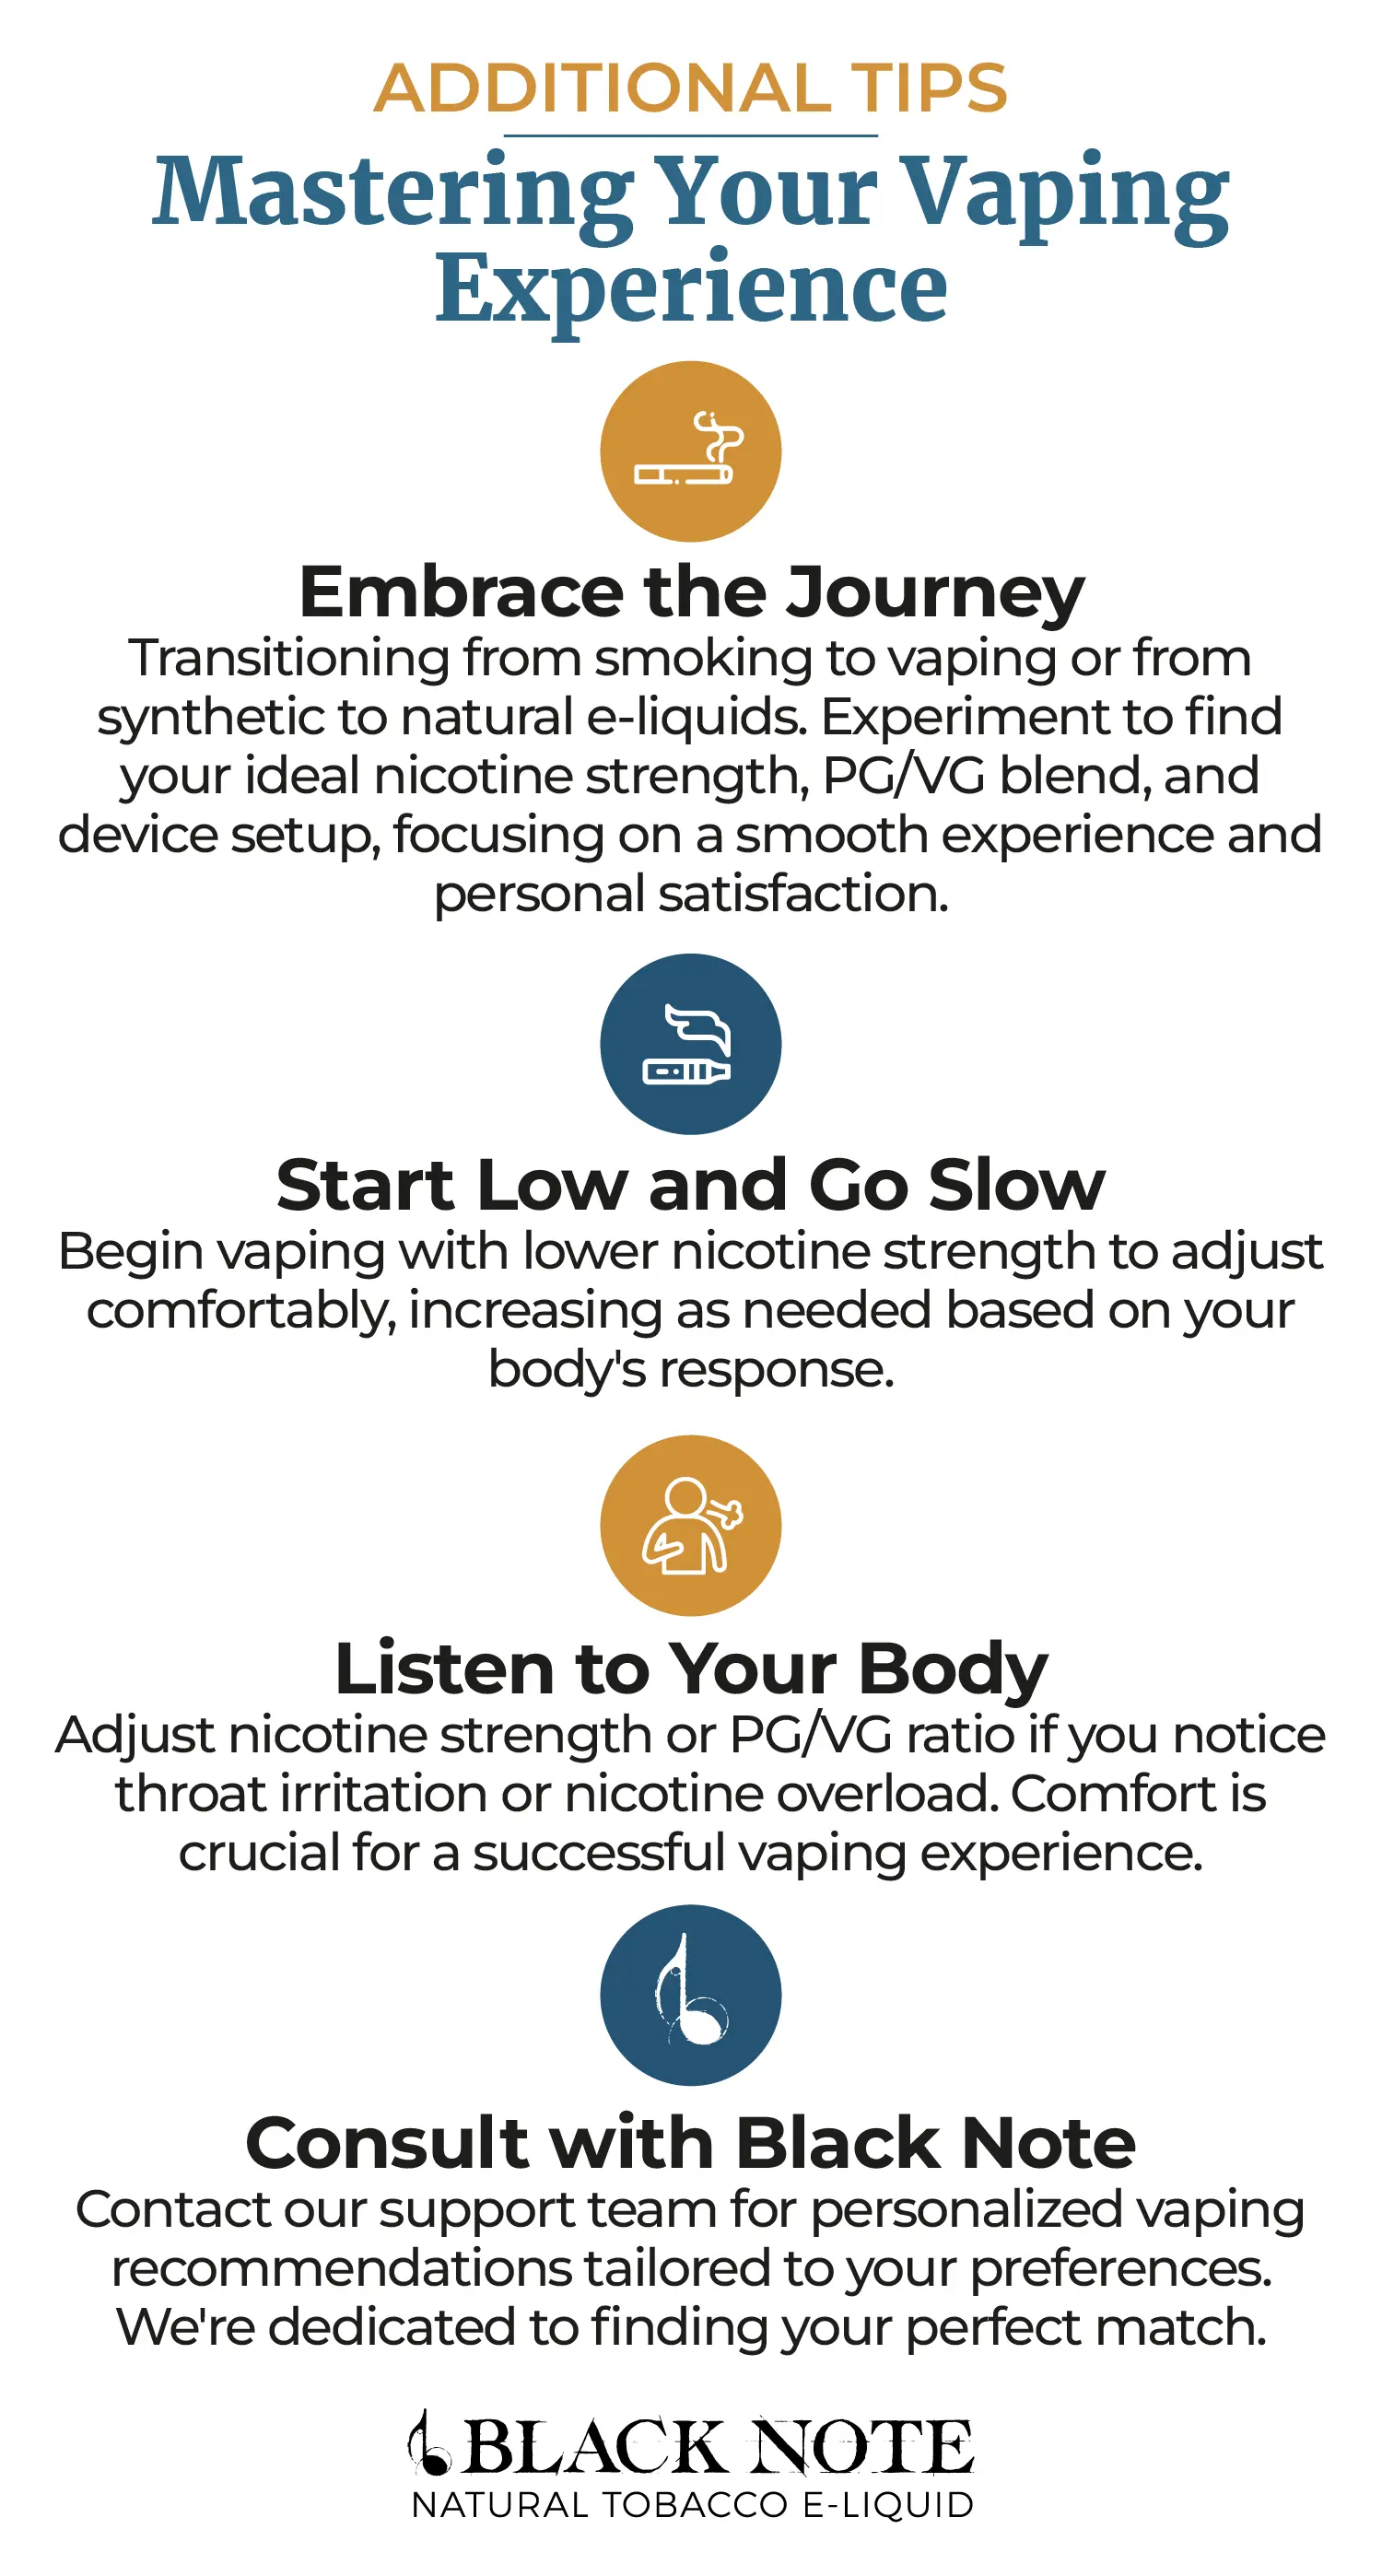 Infographic Provding Additional Tips For Mastering Your Vaping Experience